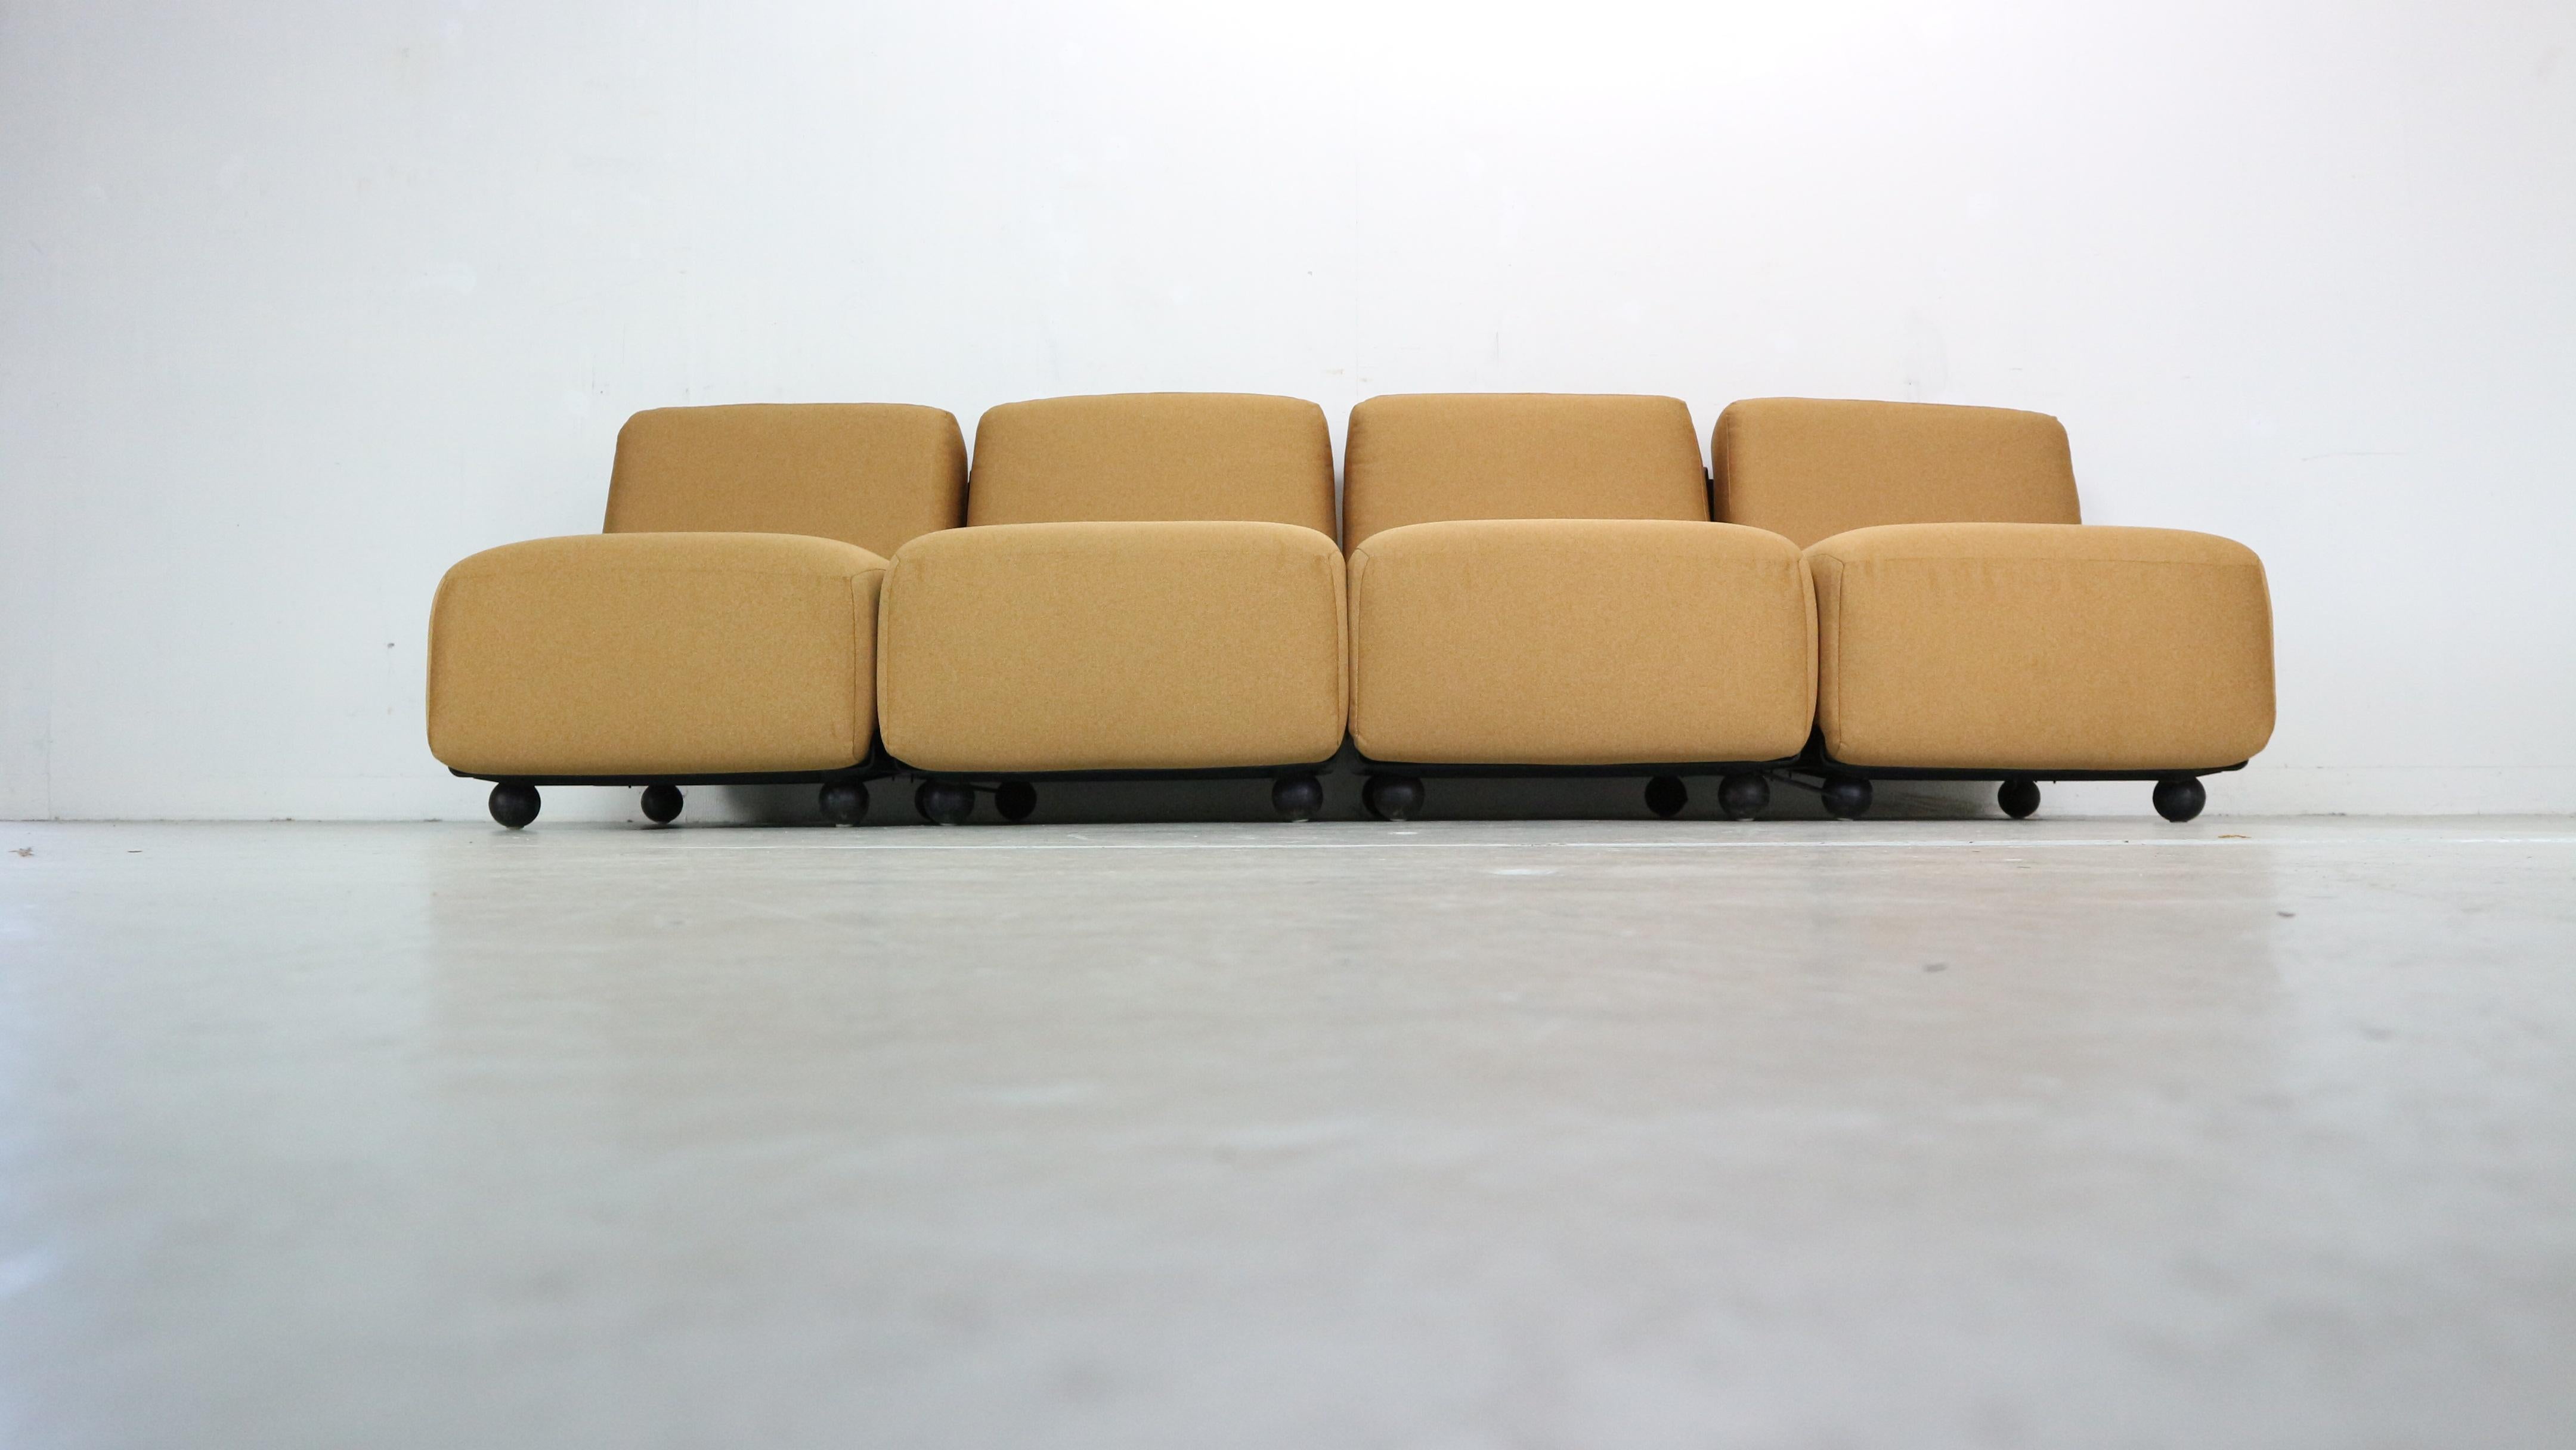 Italian Amanta 24 Chairs by Mario Bellini for C&B, 1970s For Sale 3